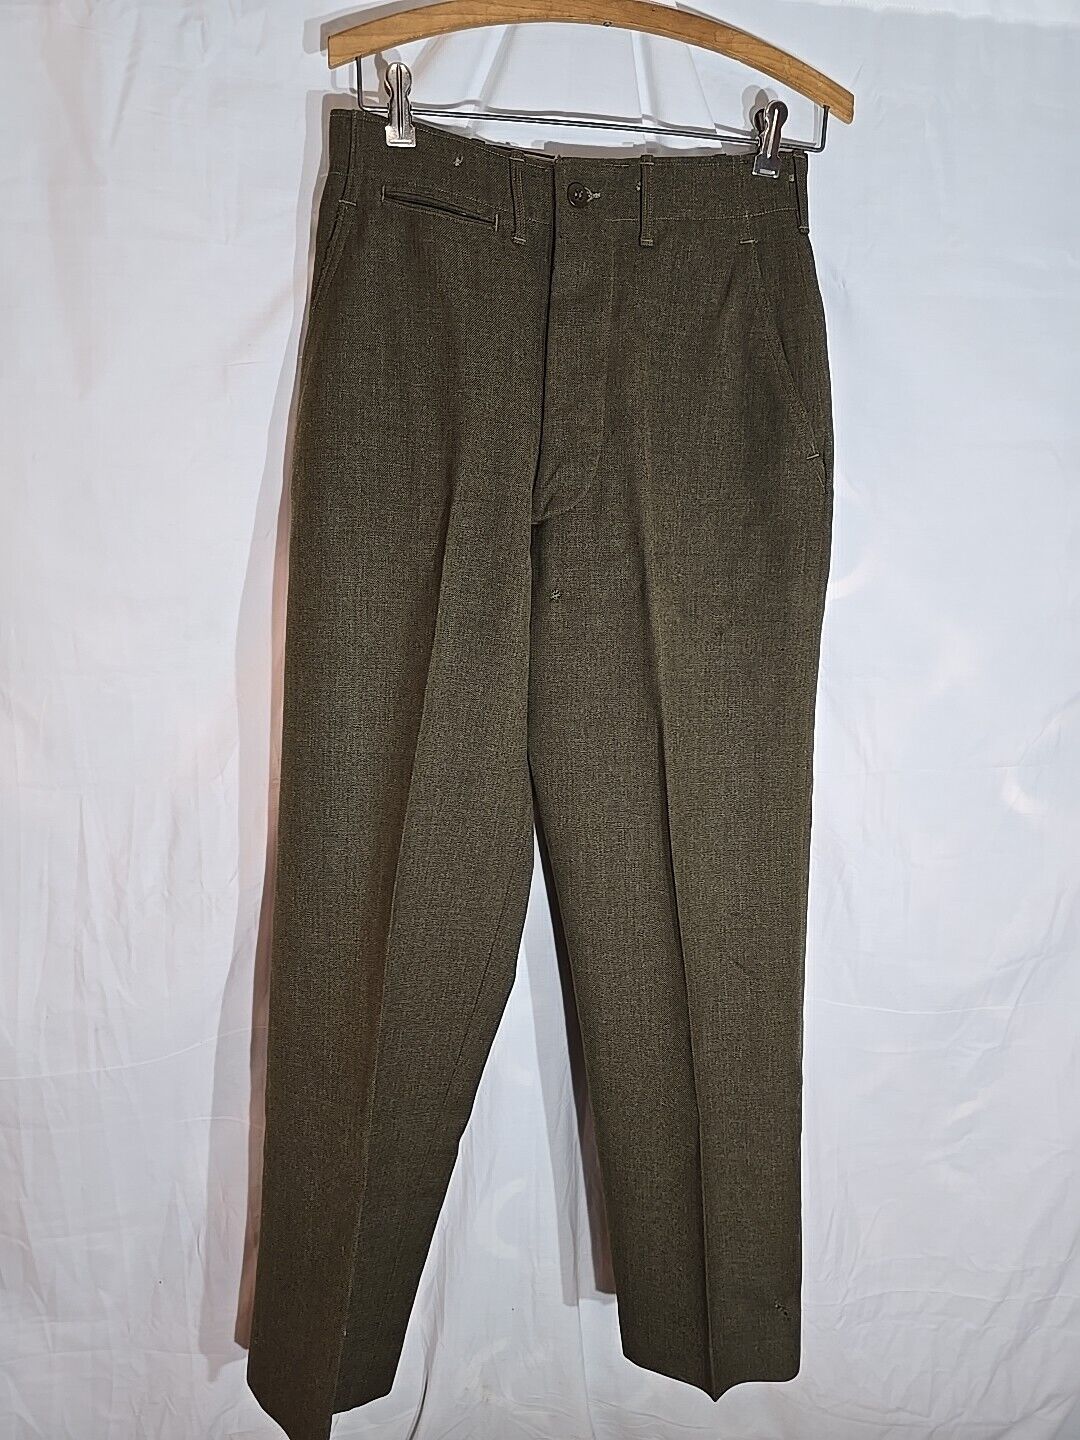 1939 WW2 Uniform Officer’s Dress Pants Trousers Army US Button Fly Size 29 X 30